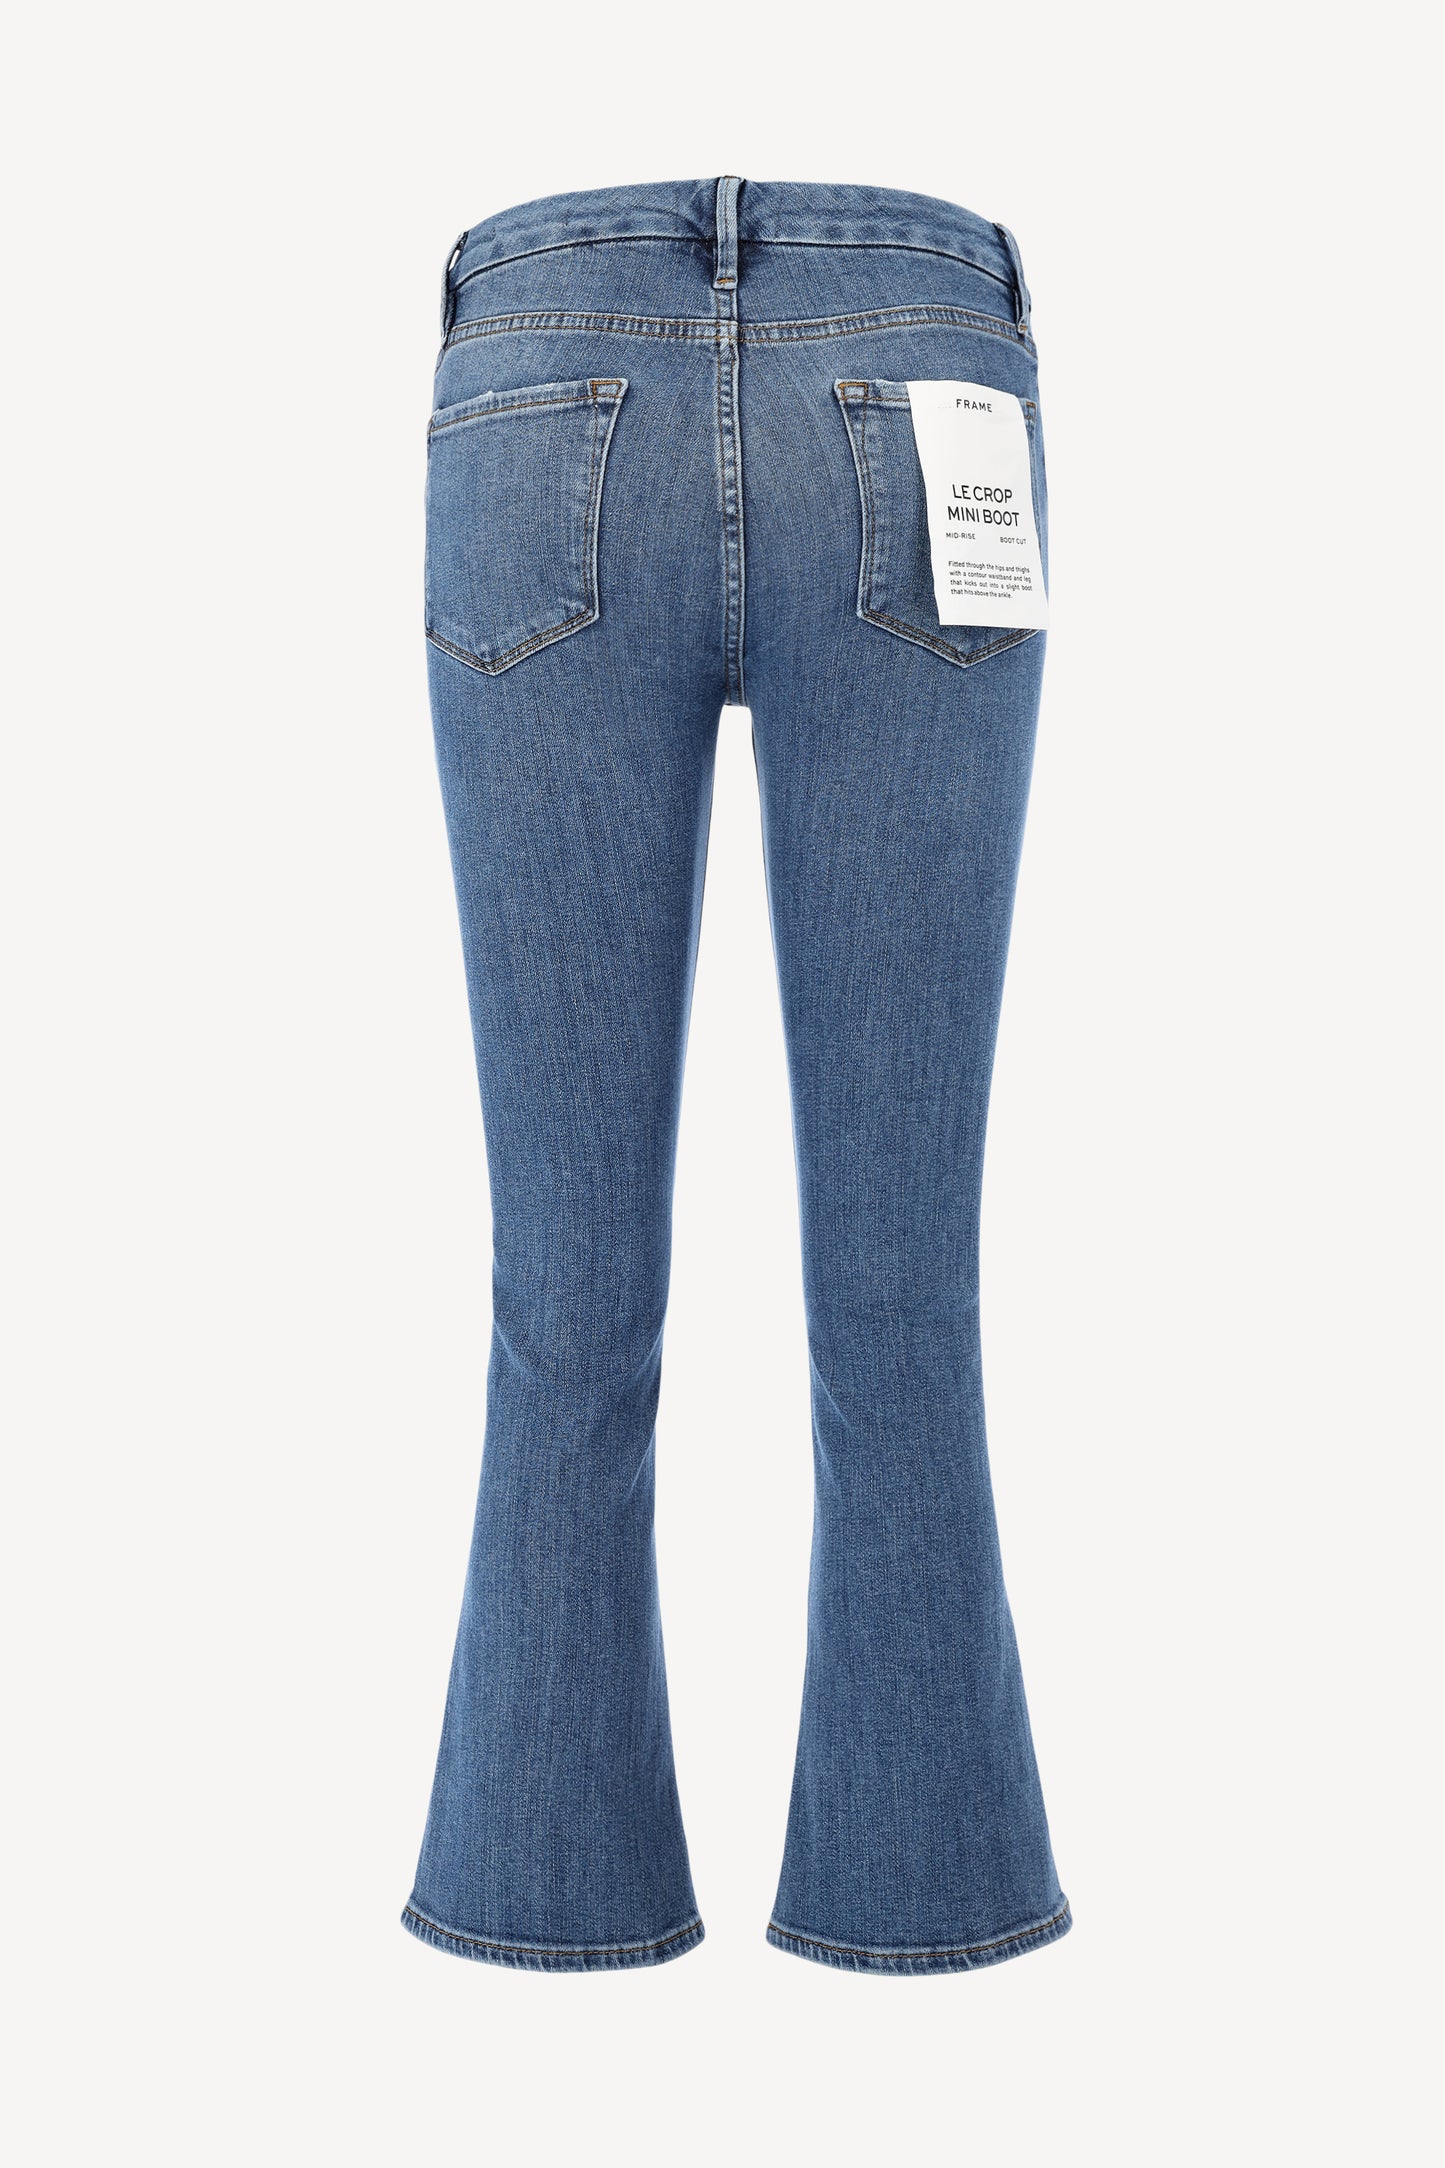 Jeans Le Crop Mini Boot in SamsonFrame - Anita Hass